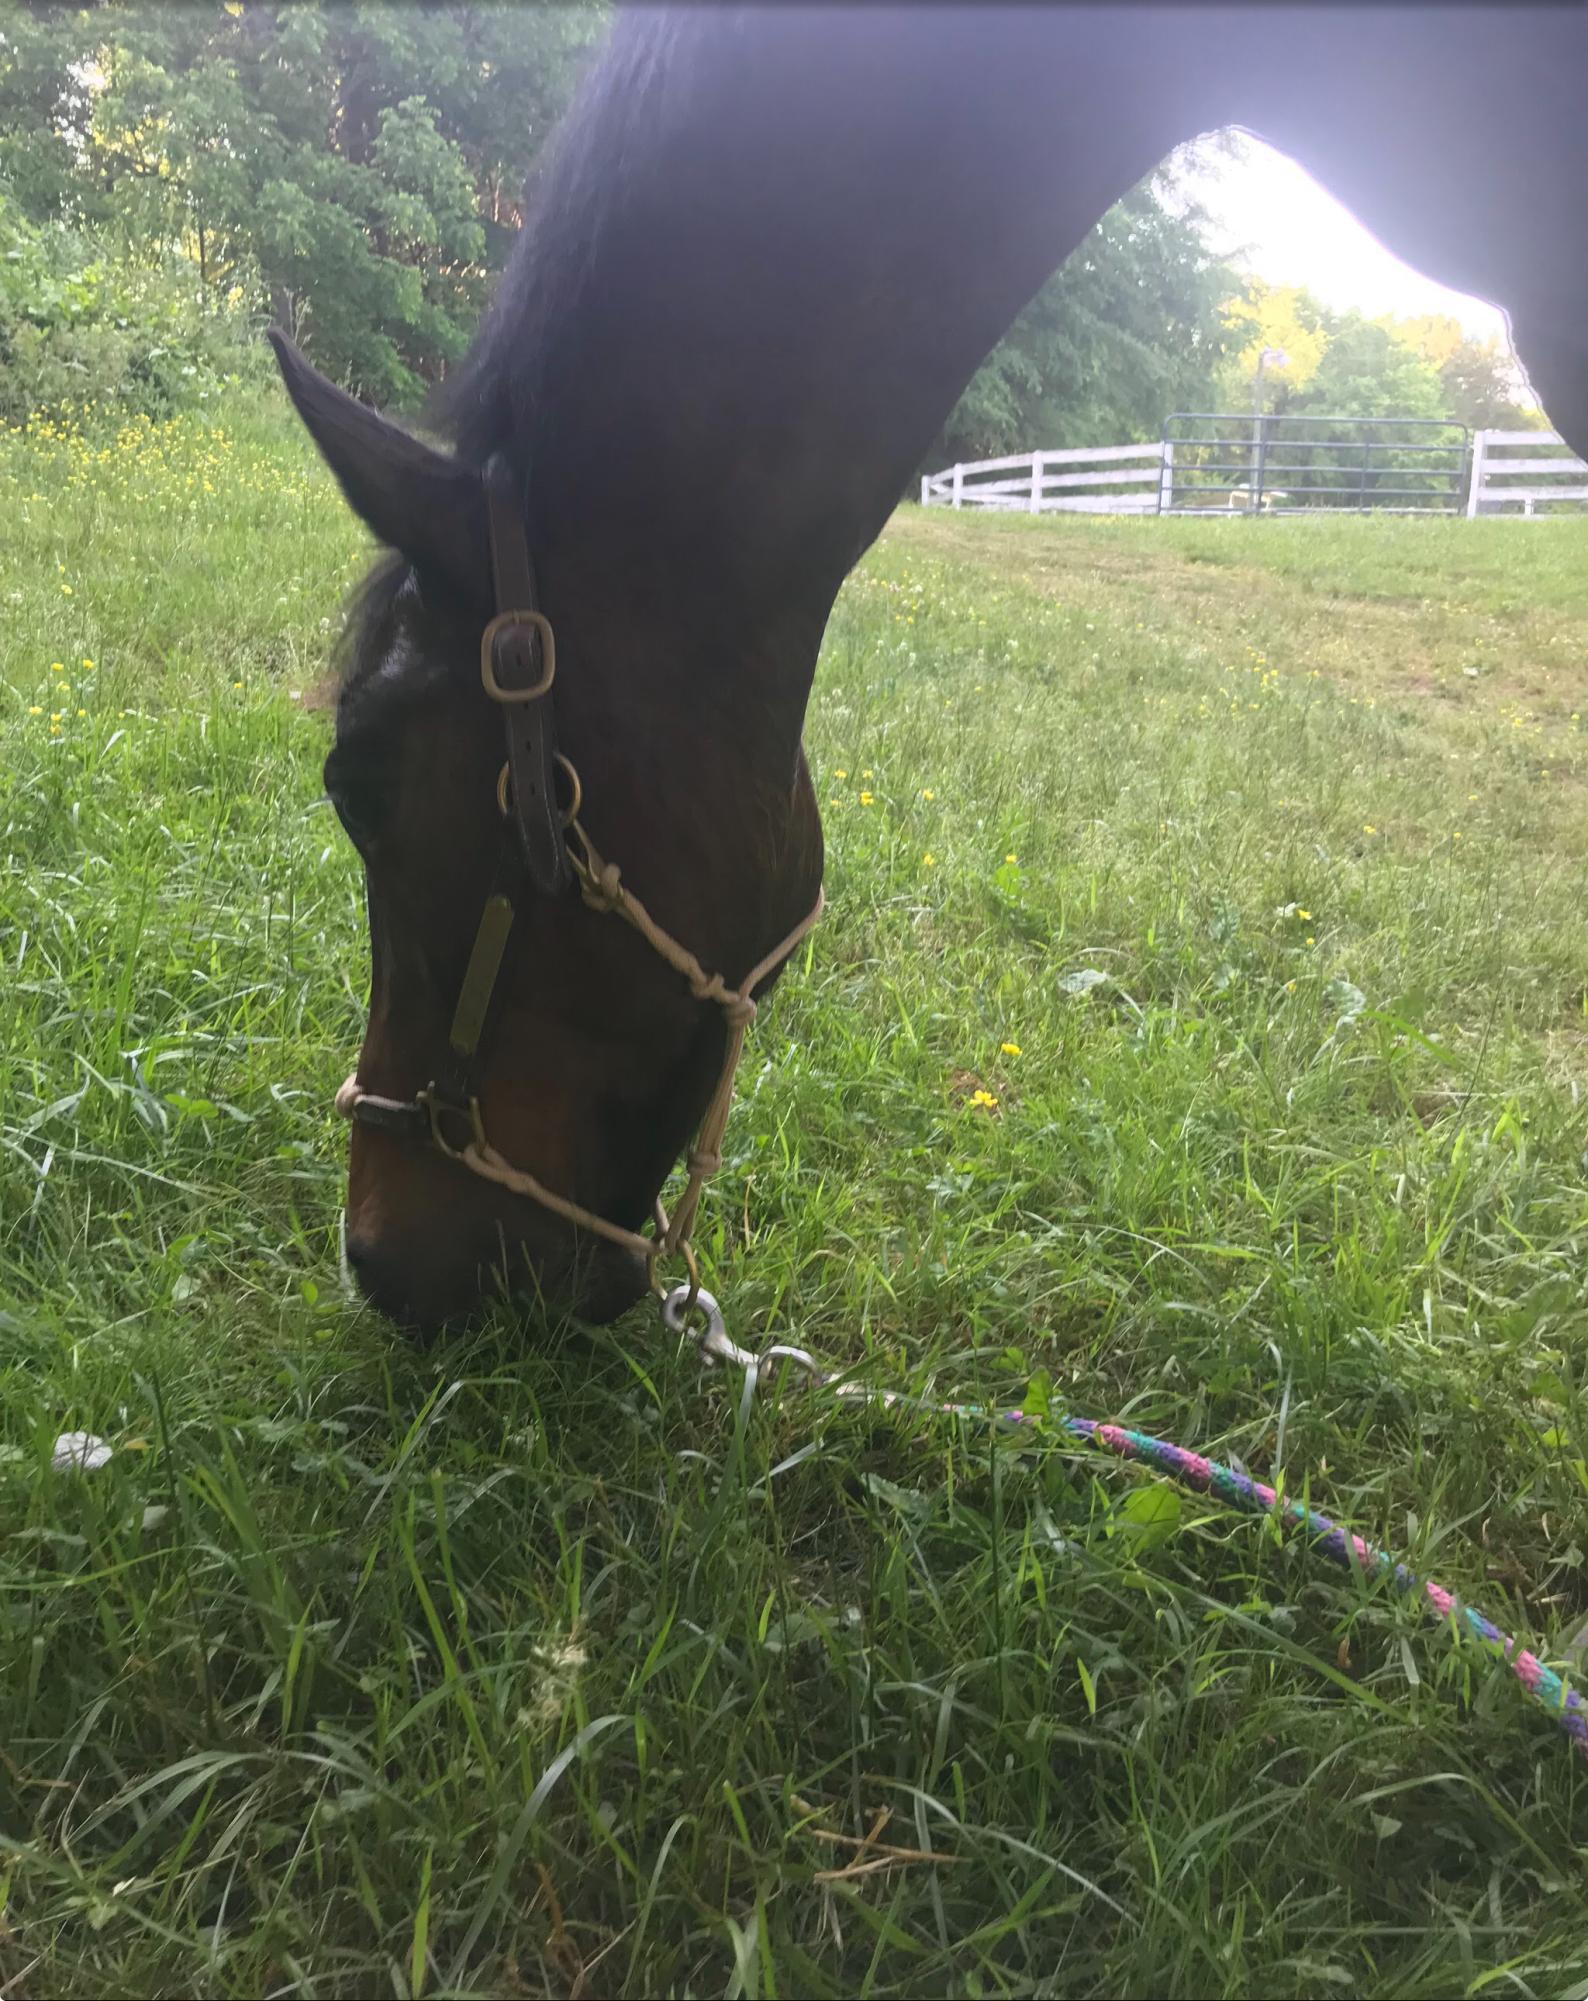 Cheyenne, a jumping horse, grazes in a field. With the Kentucky Derby just passing, something that is fresh on everyones mind is horse racing. But there is a side to horse racing that many work hard to keep hidden. There is a sad truth behind the abuse and horror of horse racing. 

